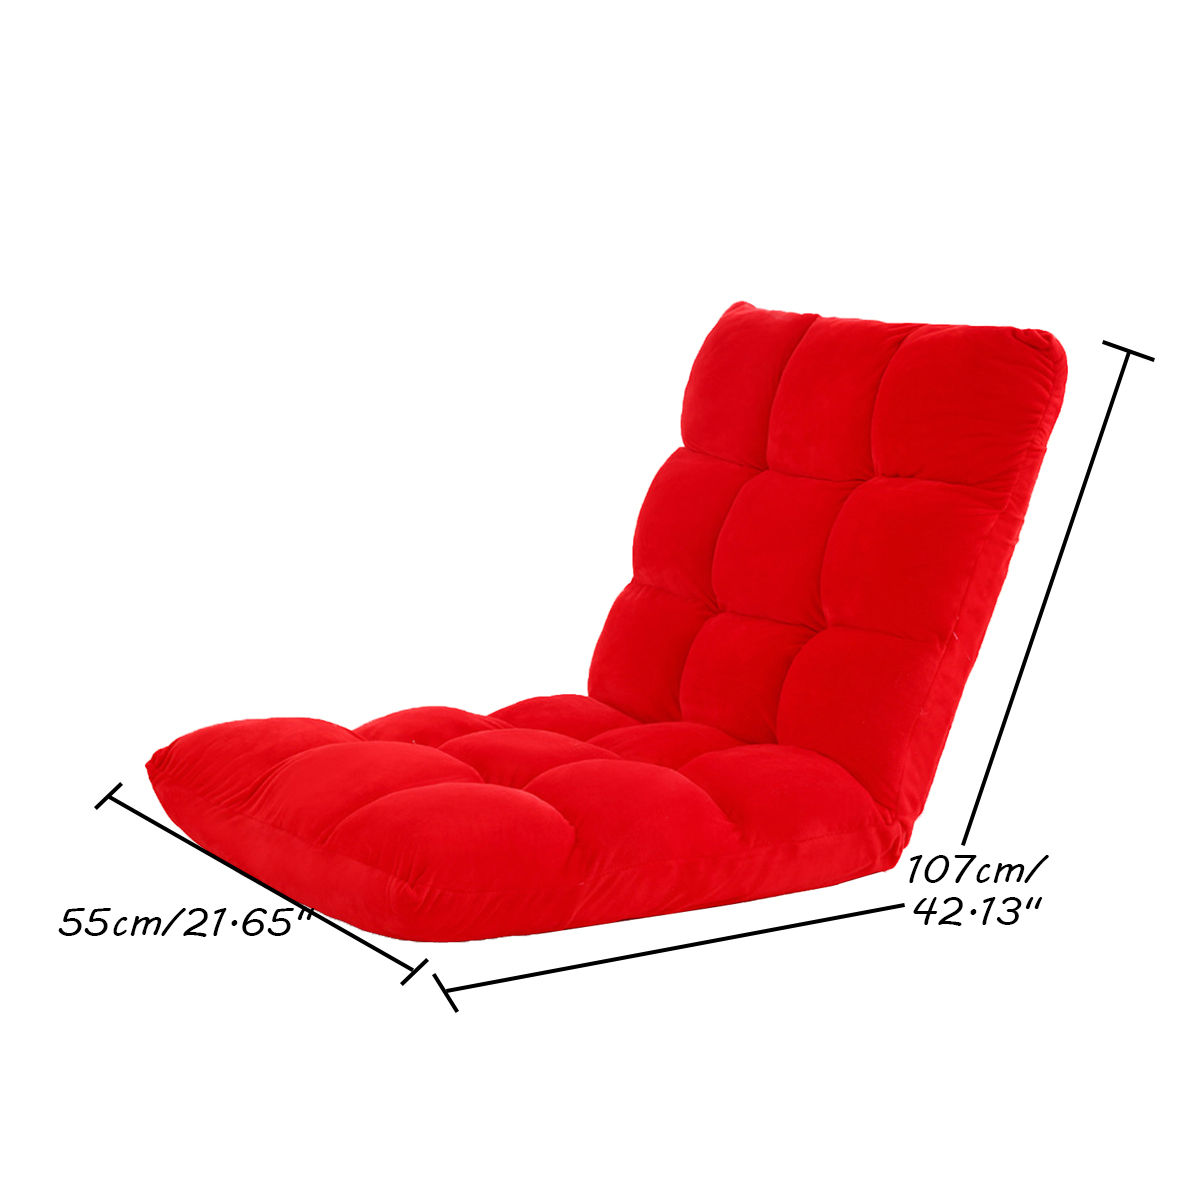 Adjustable Lazy Sofa Cushioned Floor Lounge Chair Living Room Leisure Chaise Chair 63